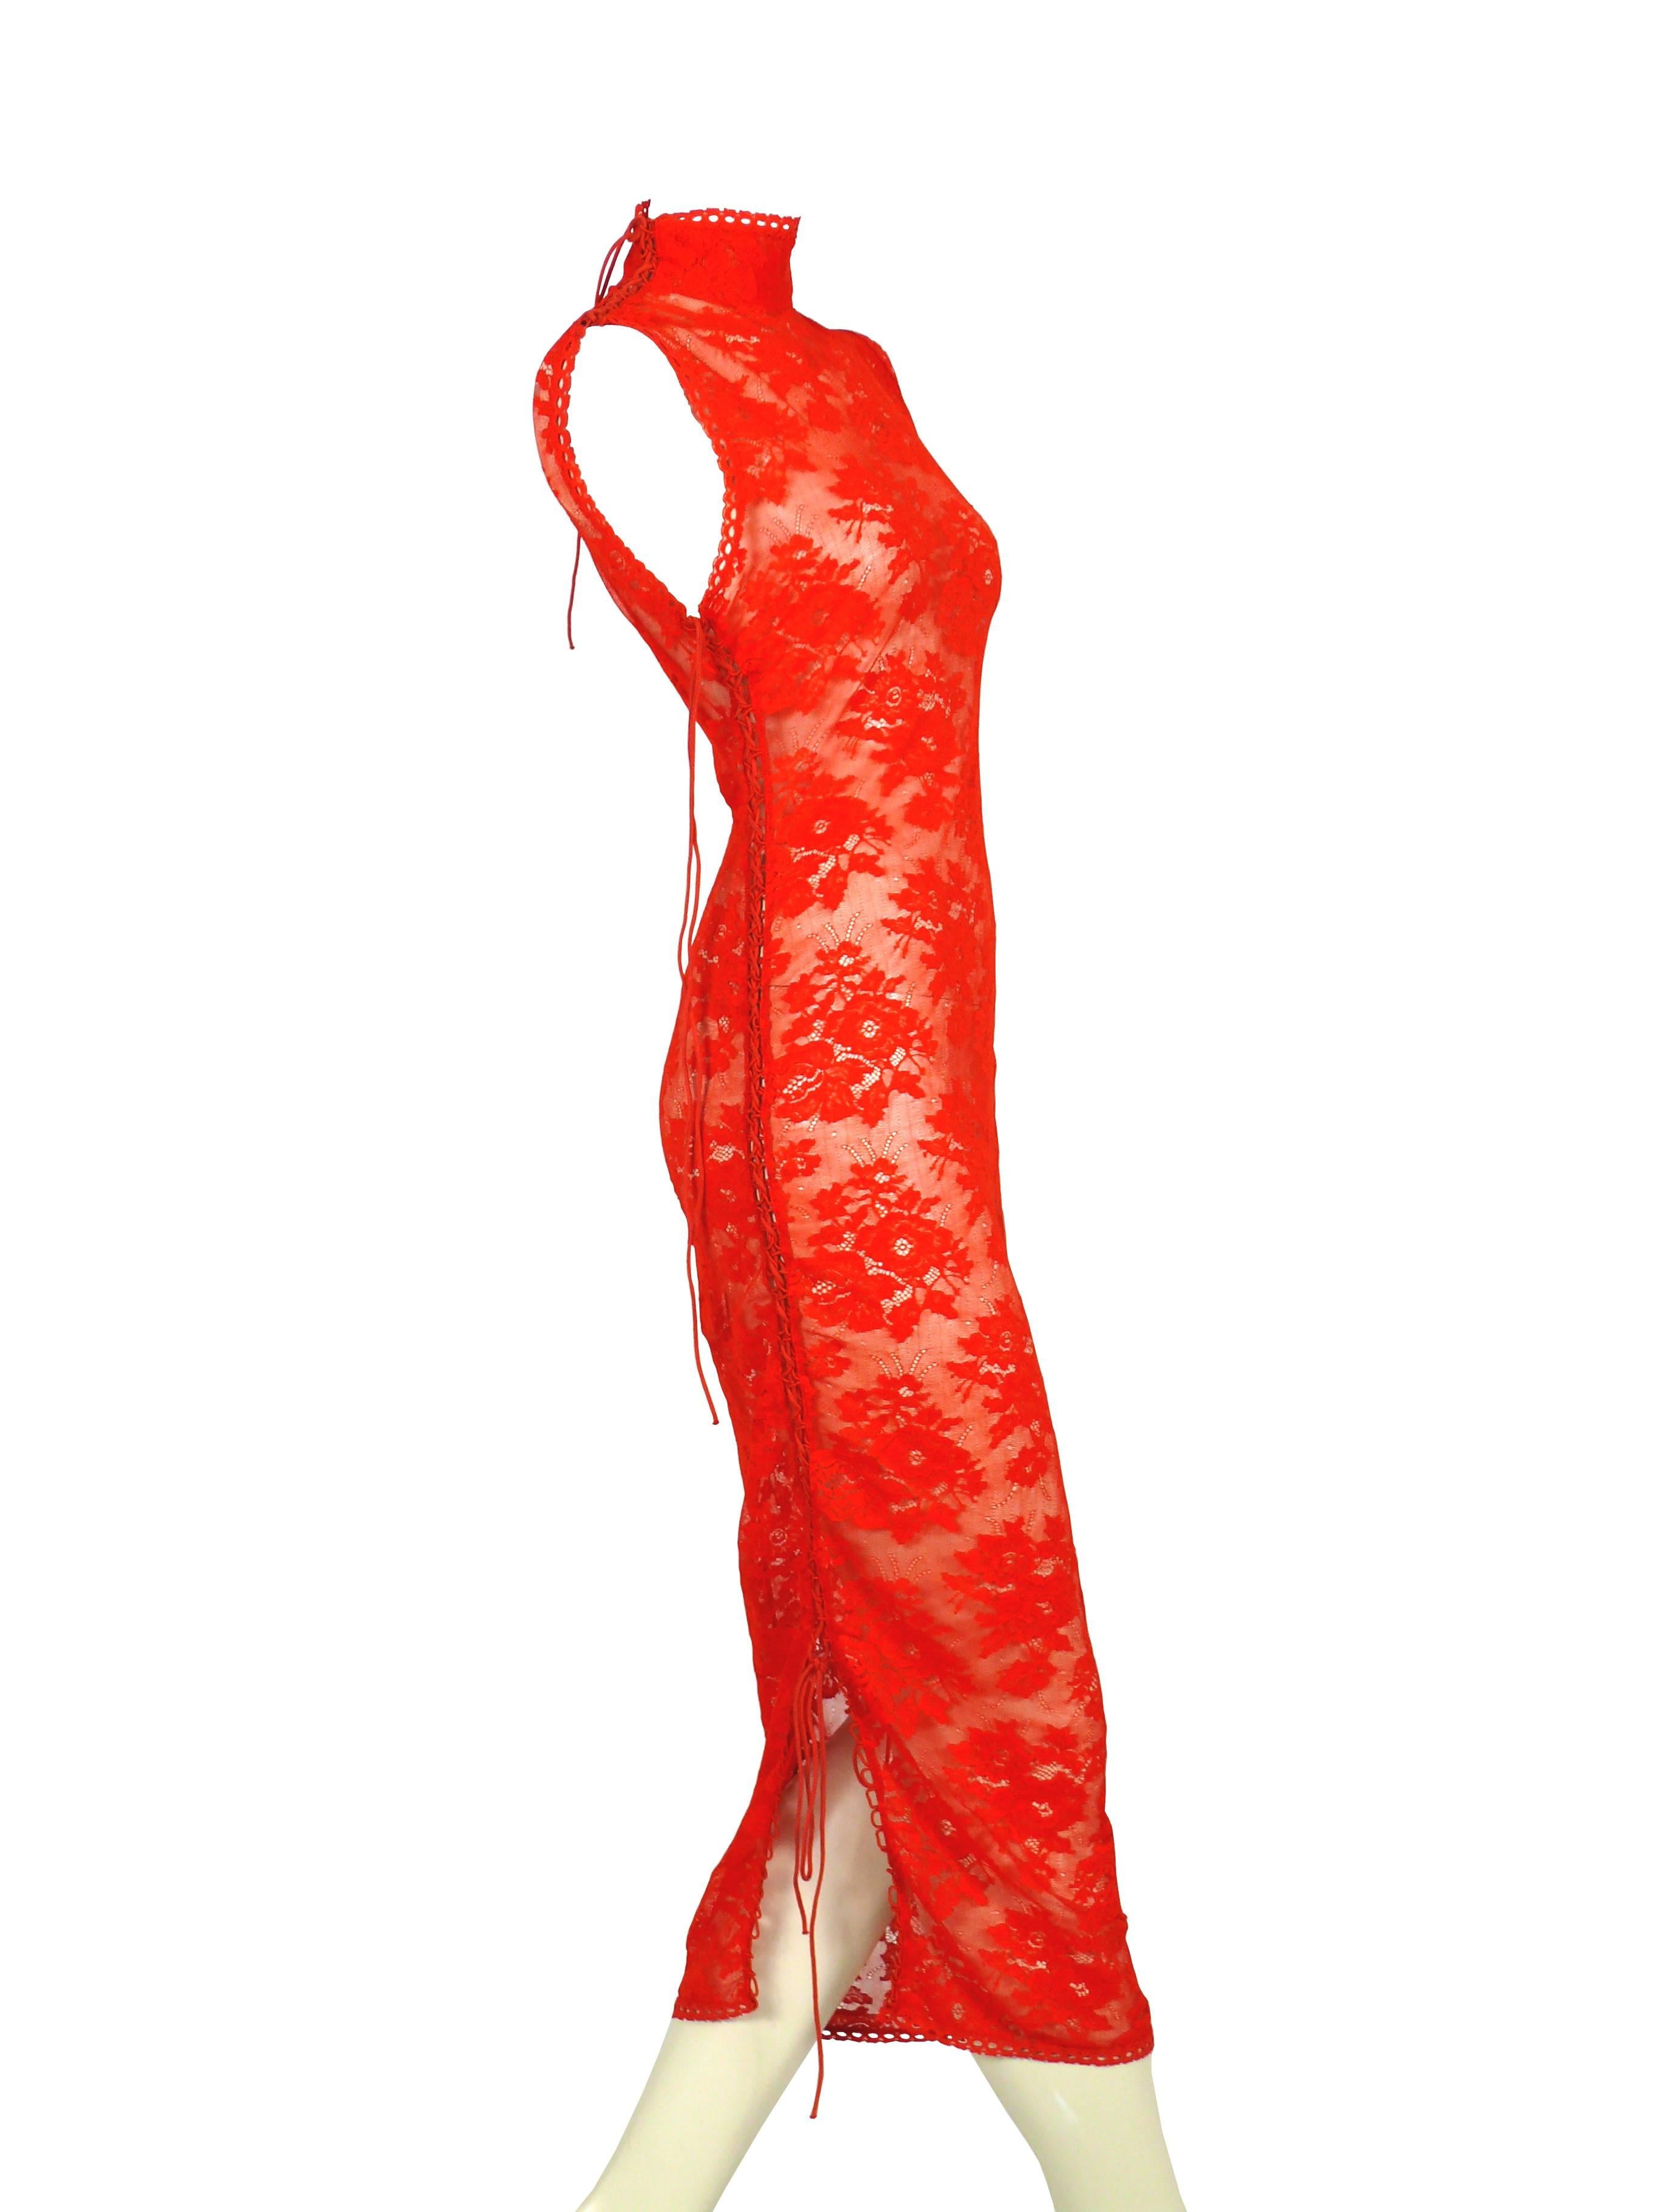 JEAN PAUL GAULTIER vintage rare lace dress featuring a floral pattern.

Gorgeous flashy red color with orange shades.

Corset lace like on one side that goes from the collar to the bottom of the dress.

Label reads JEAN PAUL GAULTIER Maille